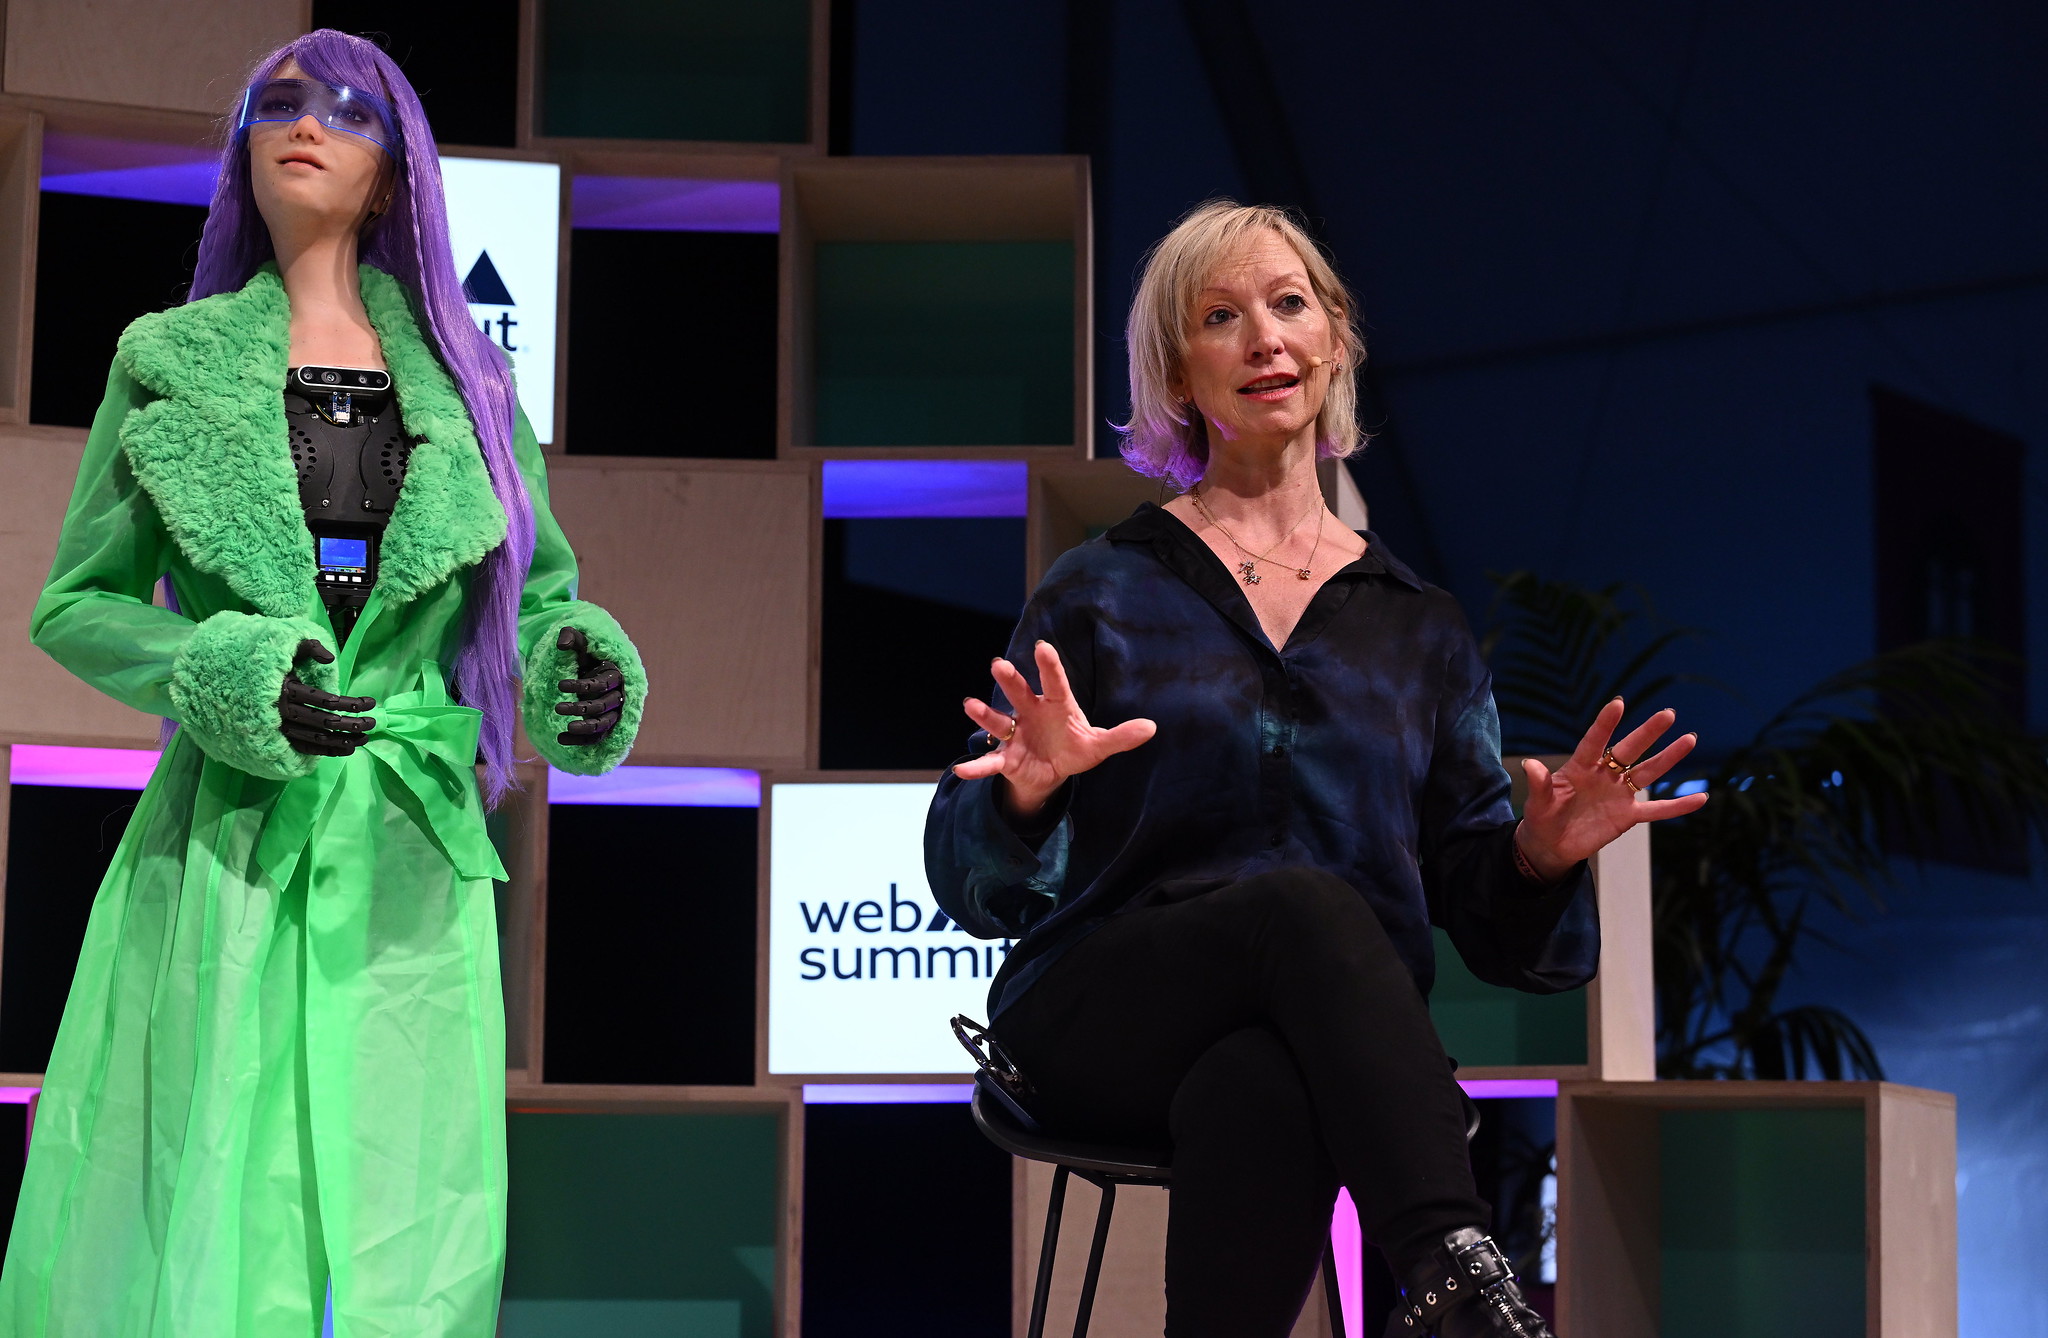 Desdemona x, Humanoid Robot, SingularityNET; left, and Janet Adams, COO, SingularityNET, on the Q&A Stage during day two of Web Summit 2023 at the Altice Arena in Lisbon, Portugal